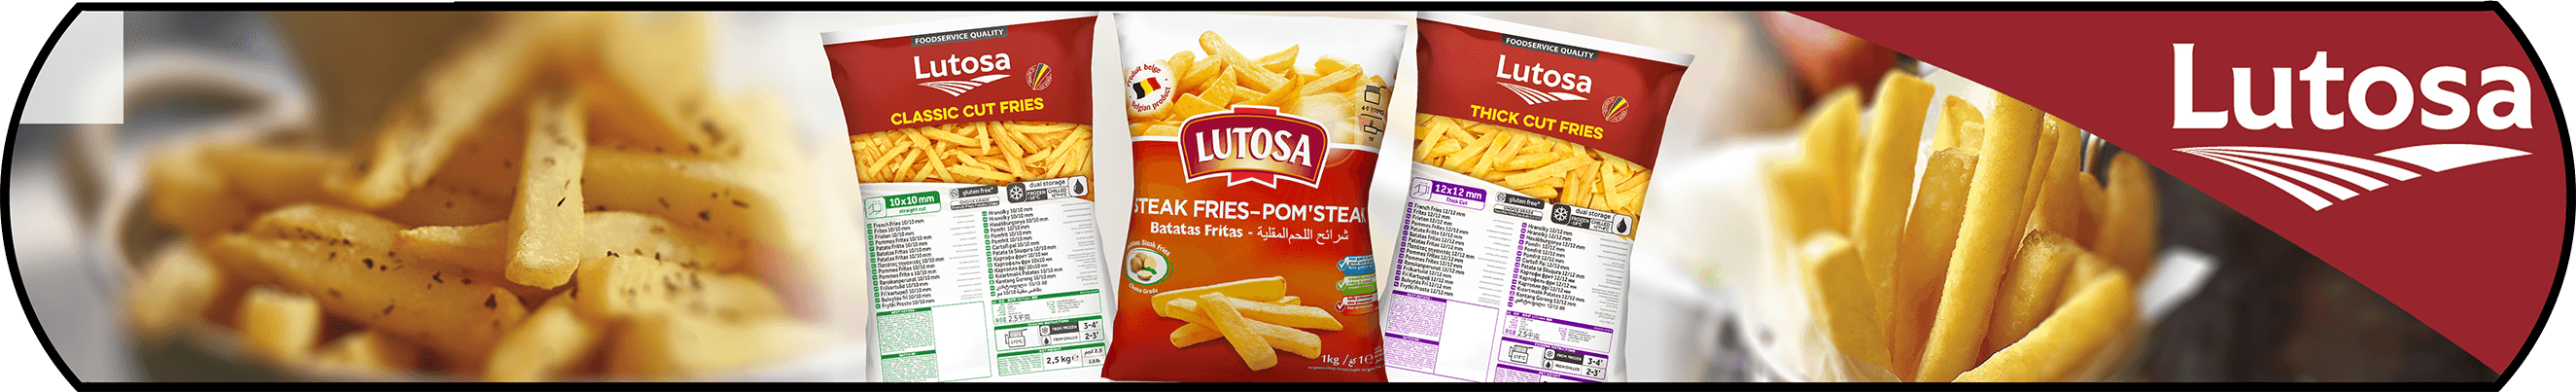 Lutosa French Fries Banner